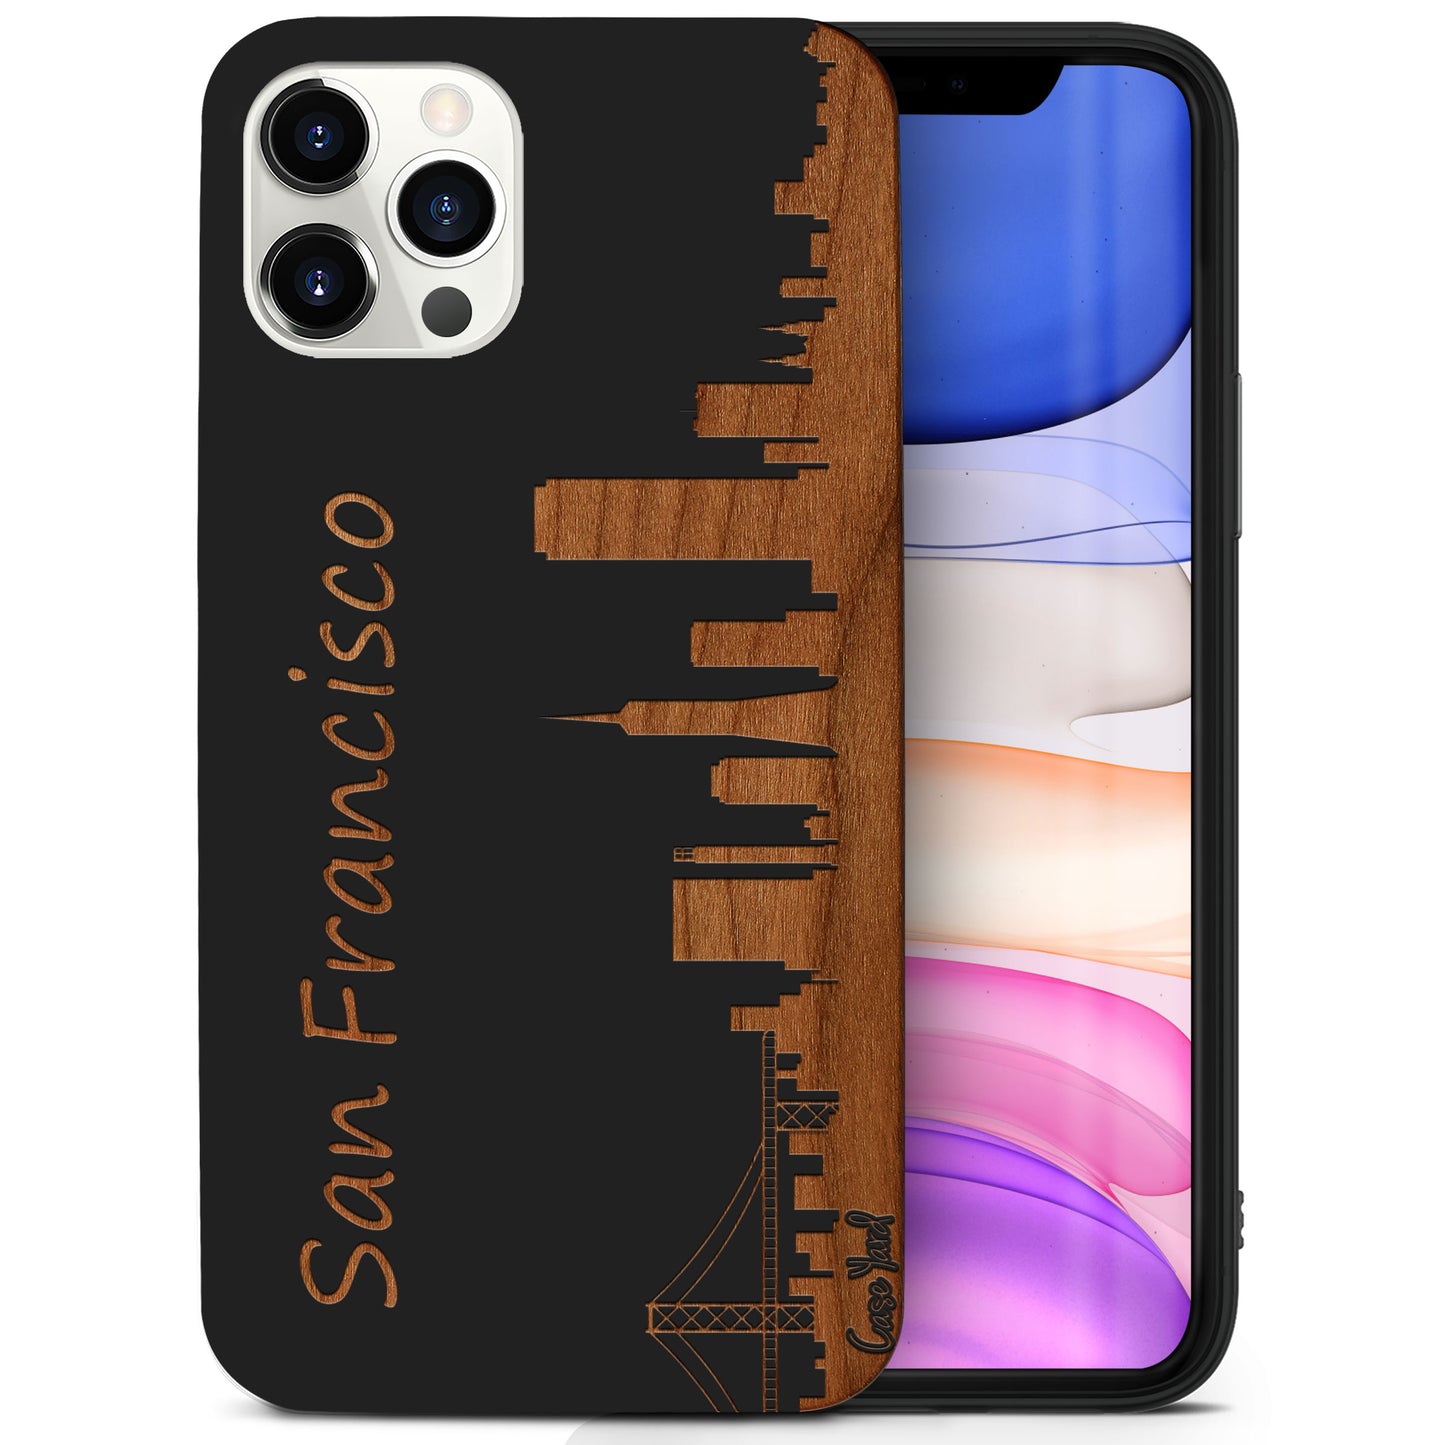 Wooden Cell Phone Case Cover, Laser Engraved case for iPhone & Samsung phone Skyline San Francisco Design